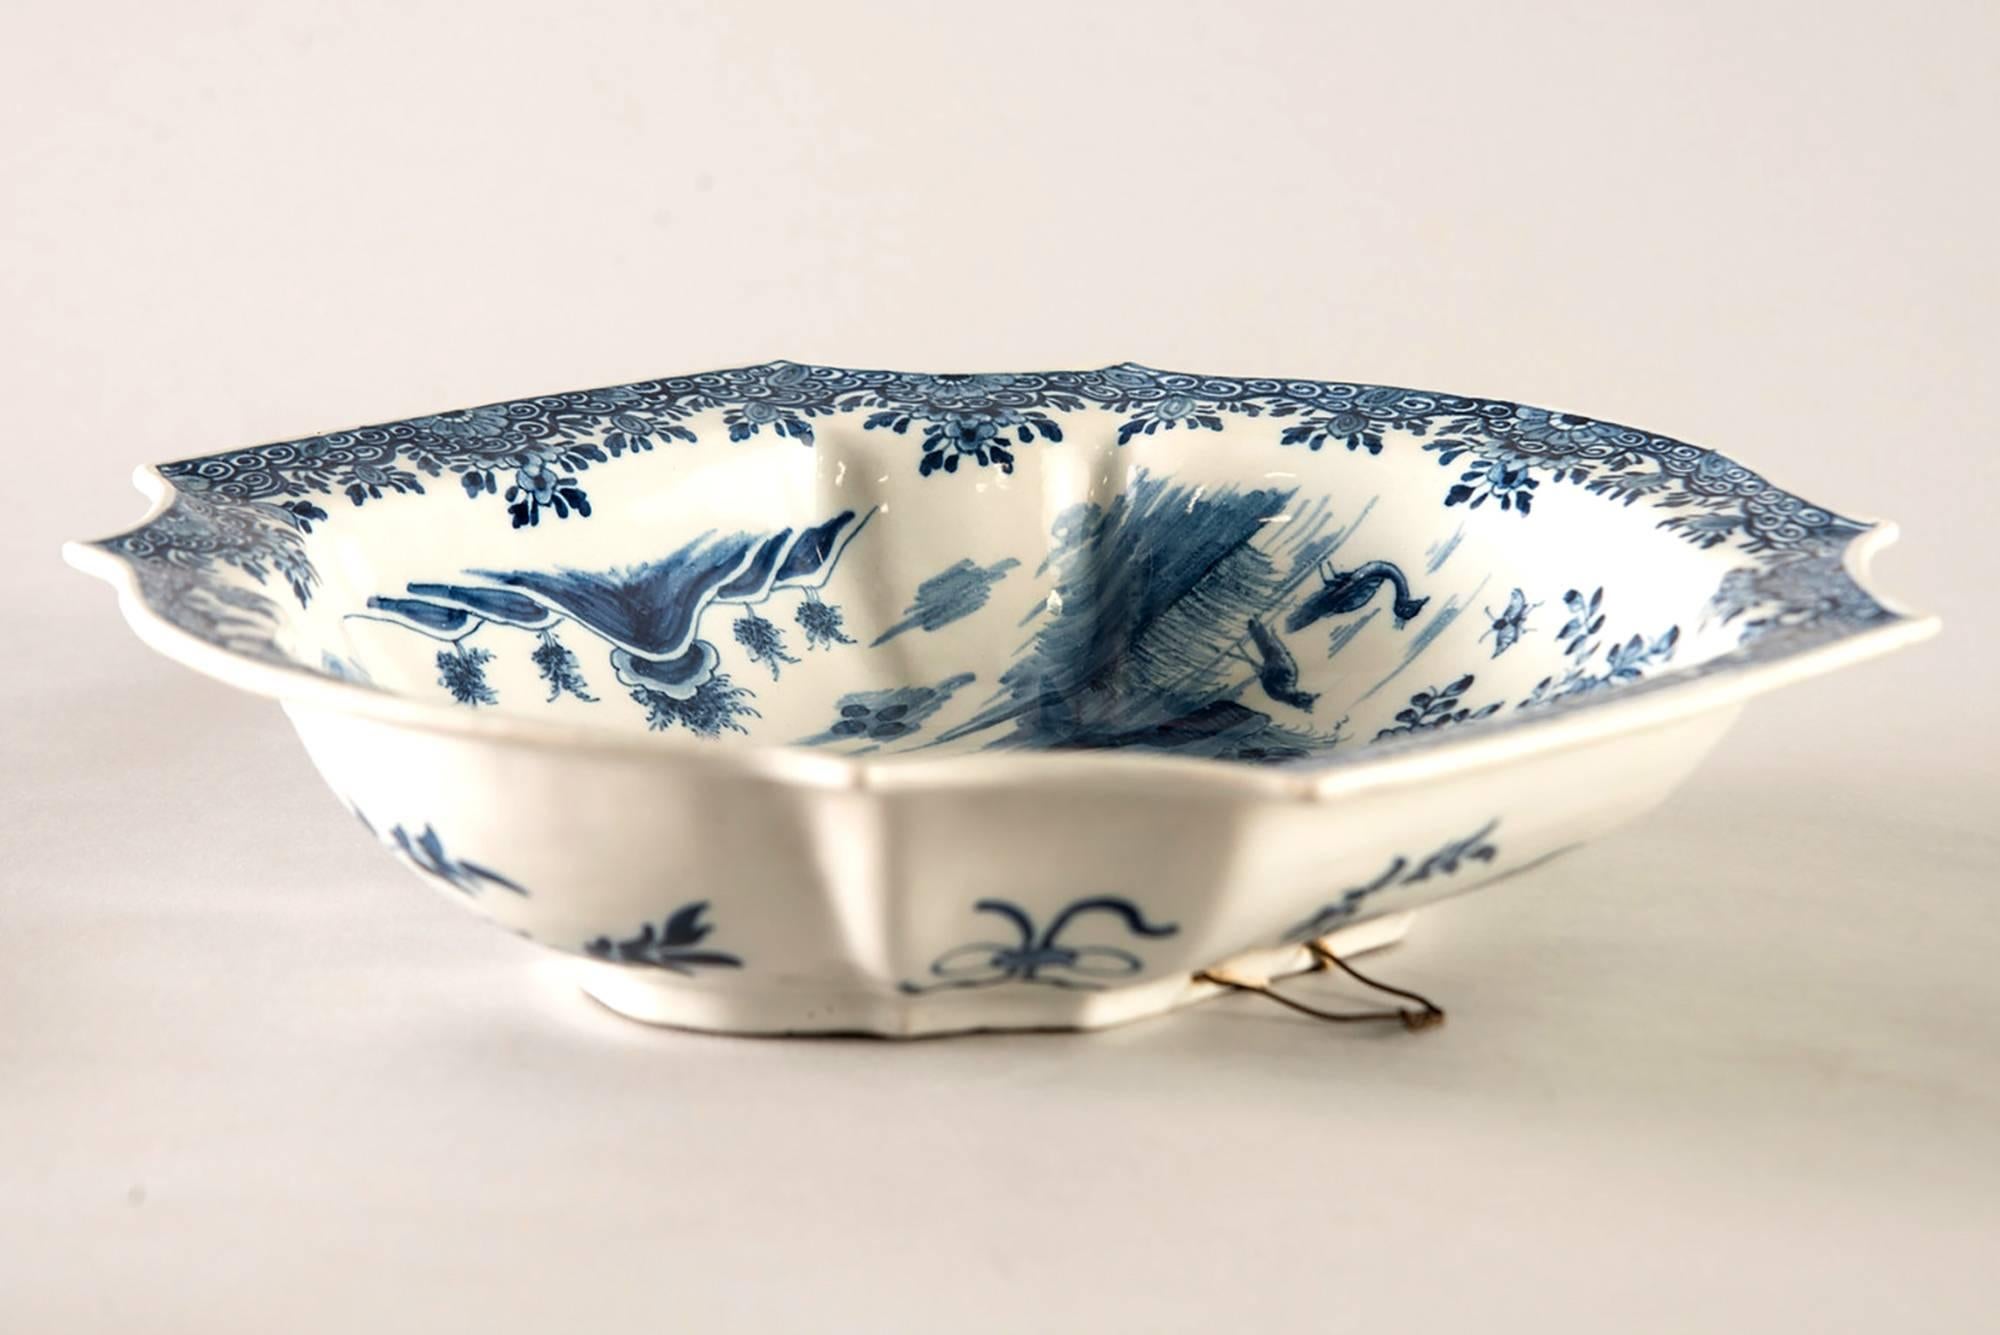 20th Century Blue and White Delft Platter with Chinoiserie Design